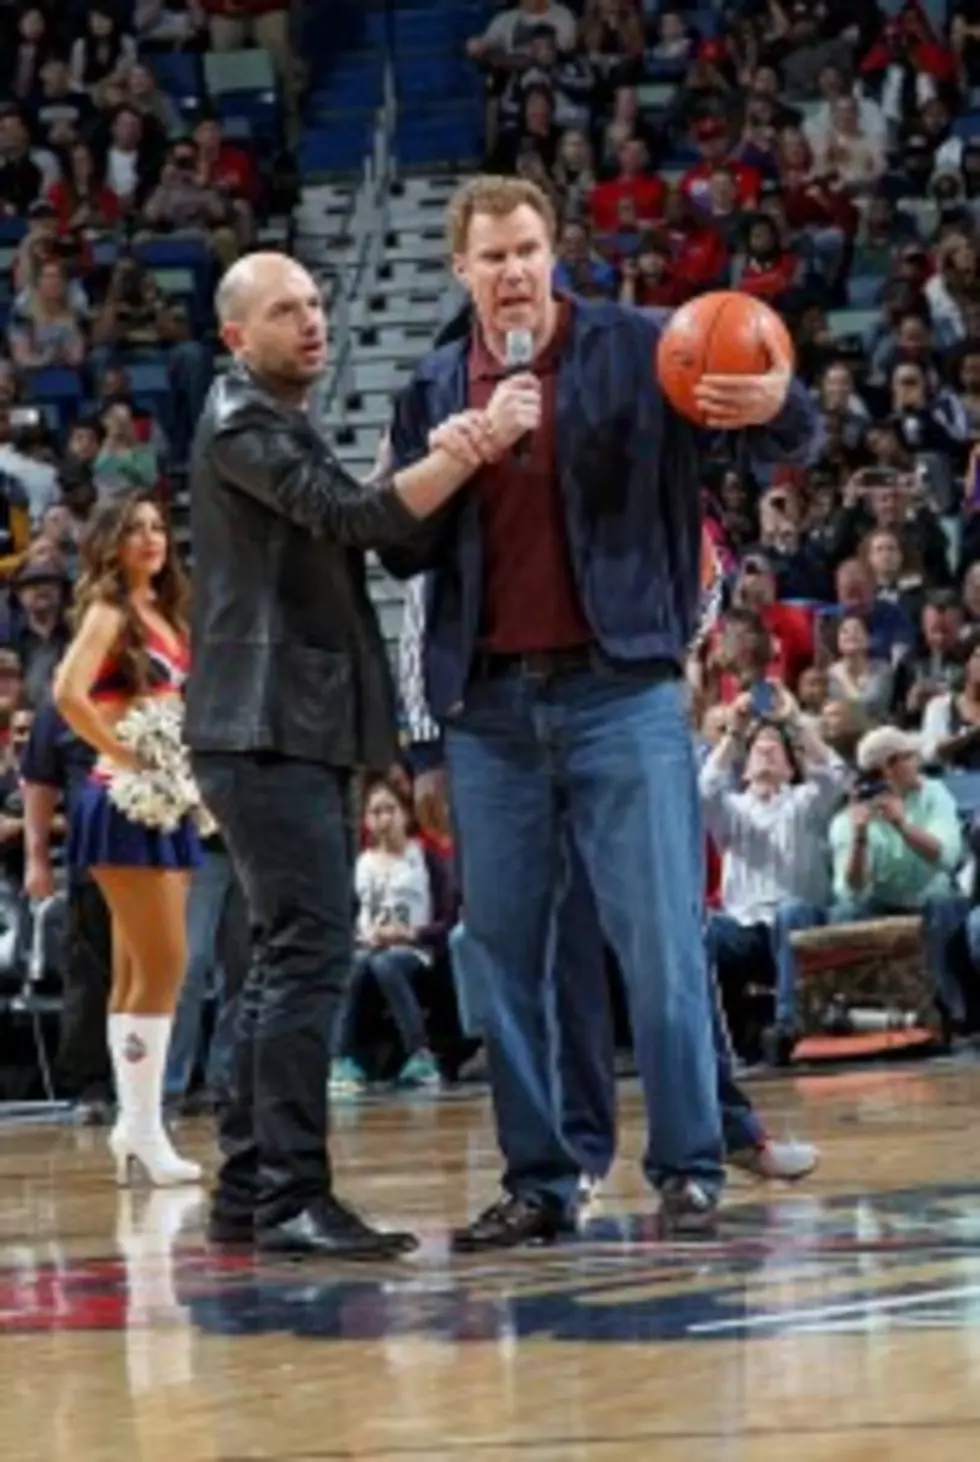 Will Ferrell is Up to His Old Antics at a New Orleans Pelicans Game